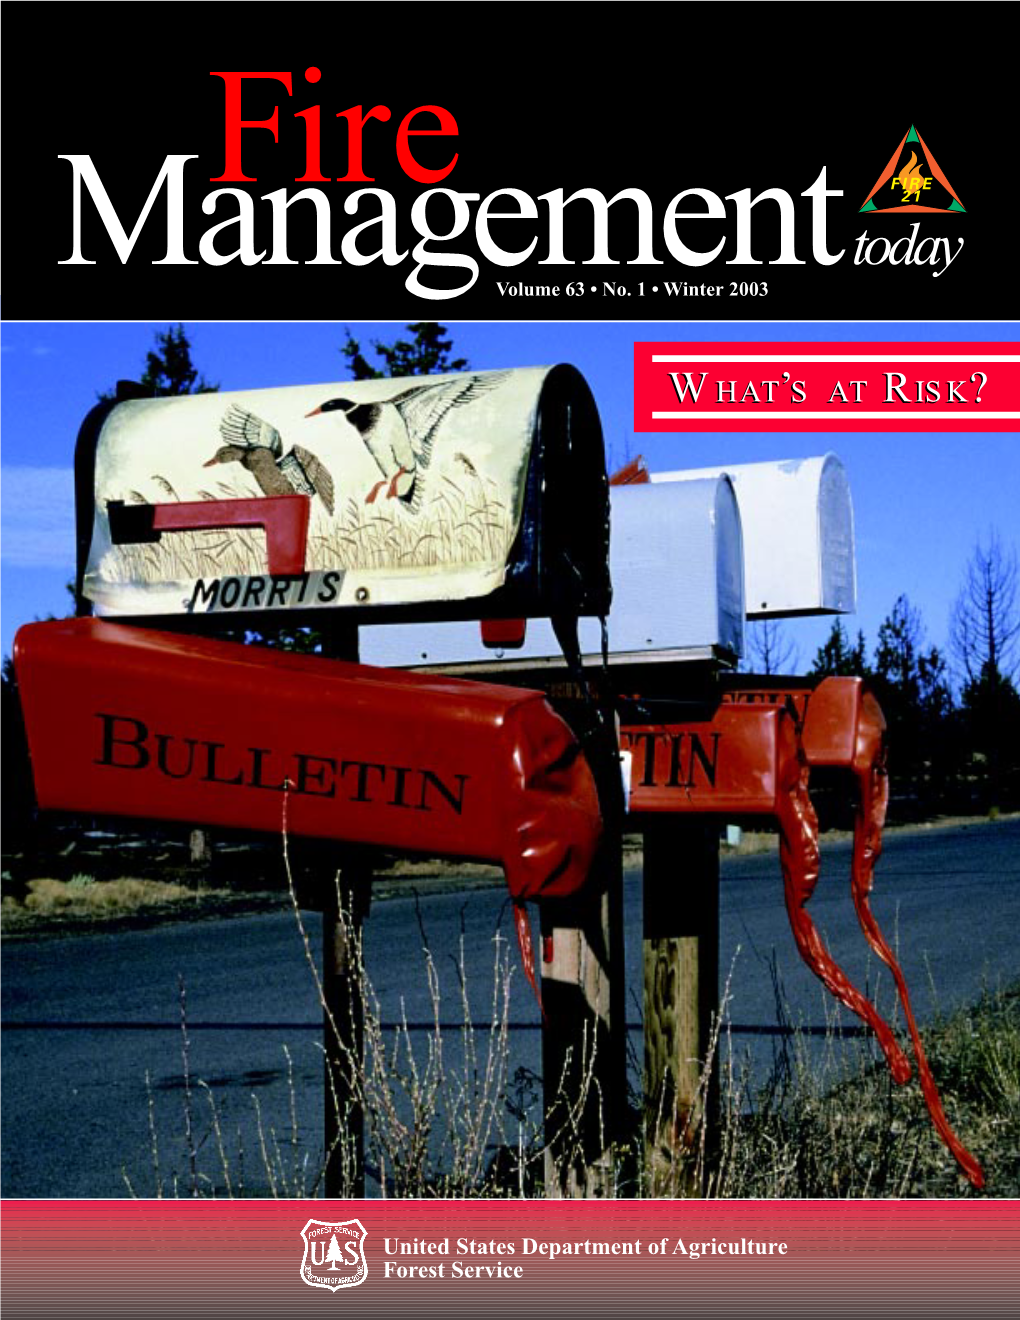 Fire Management Today Volume 63 • No